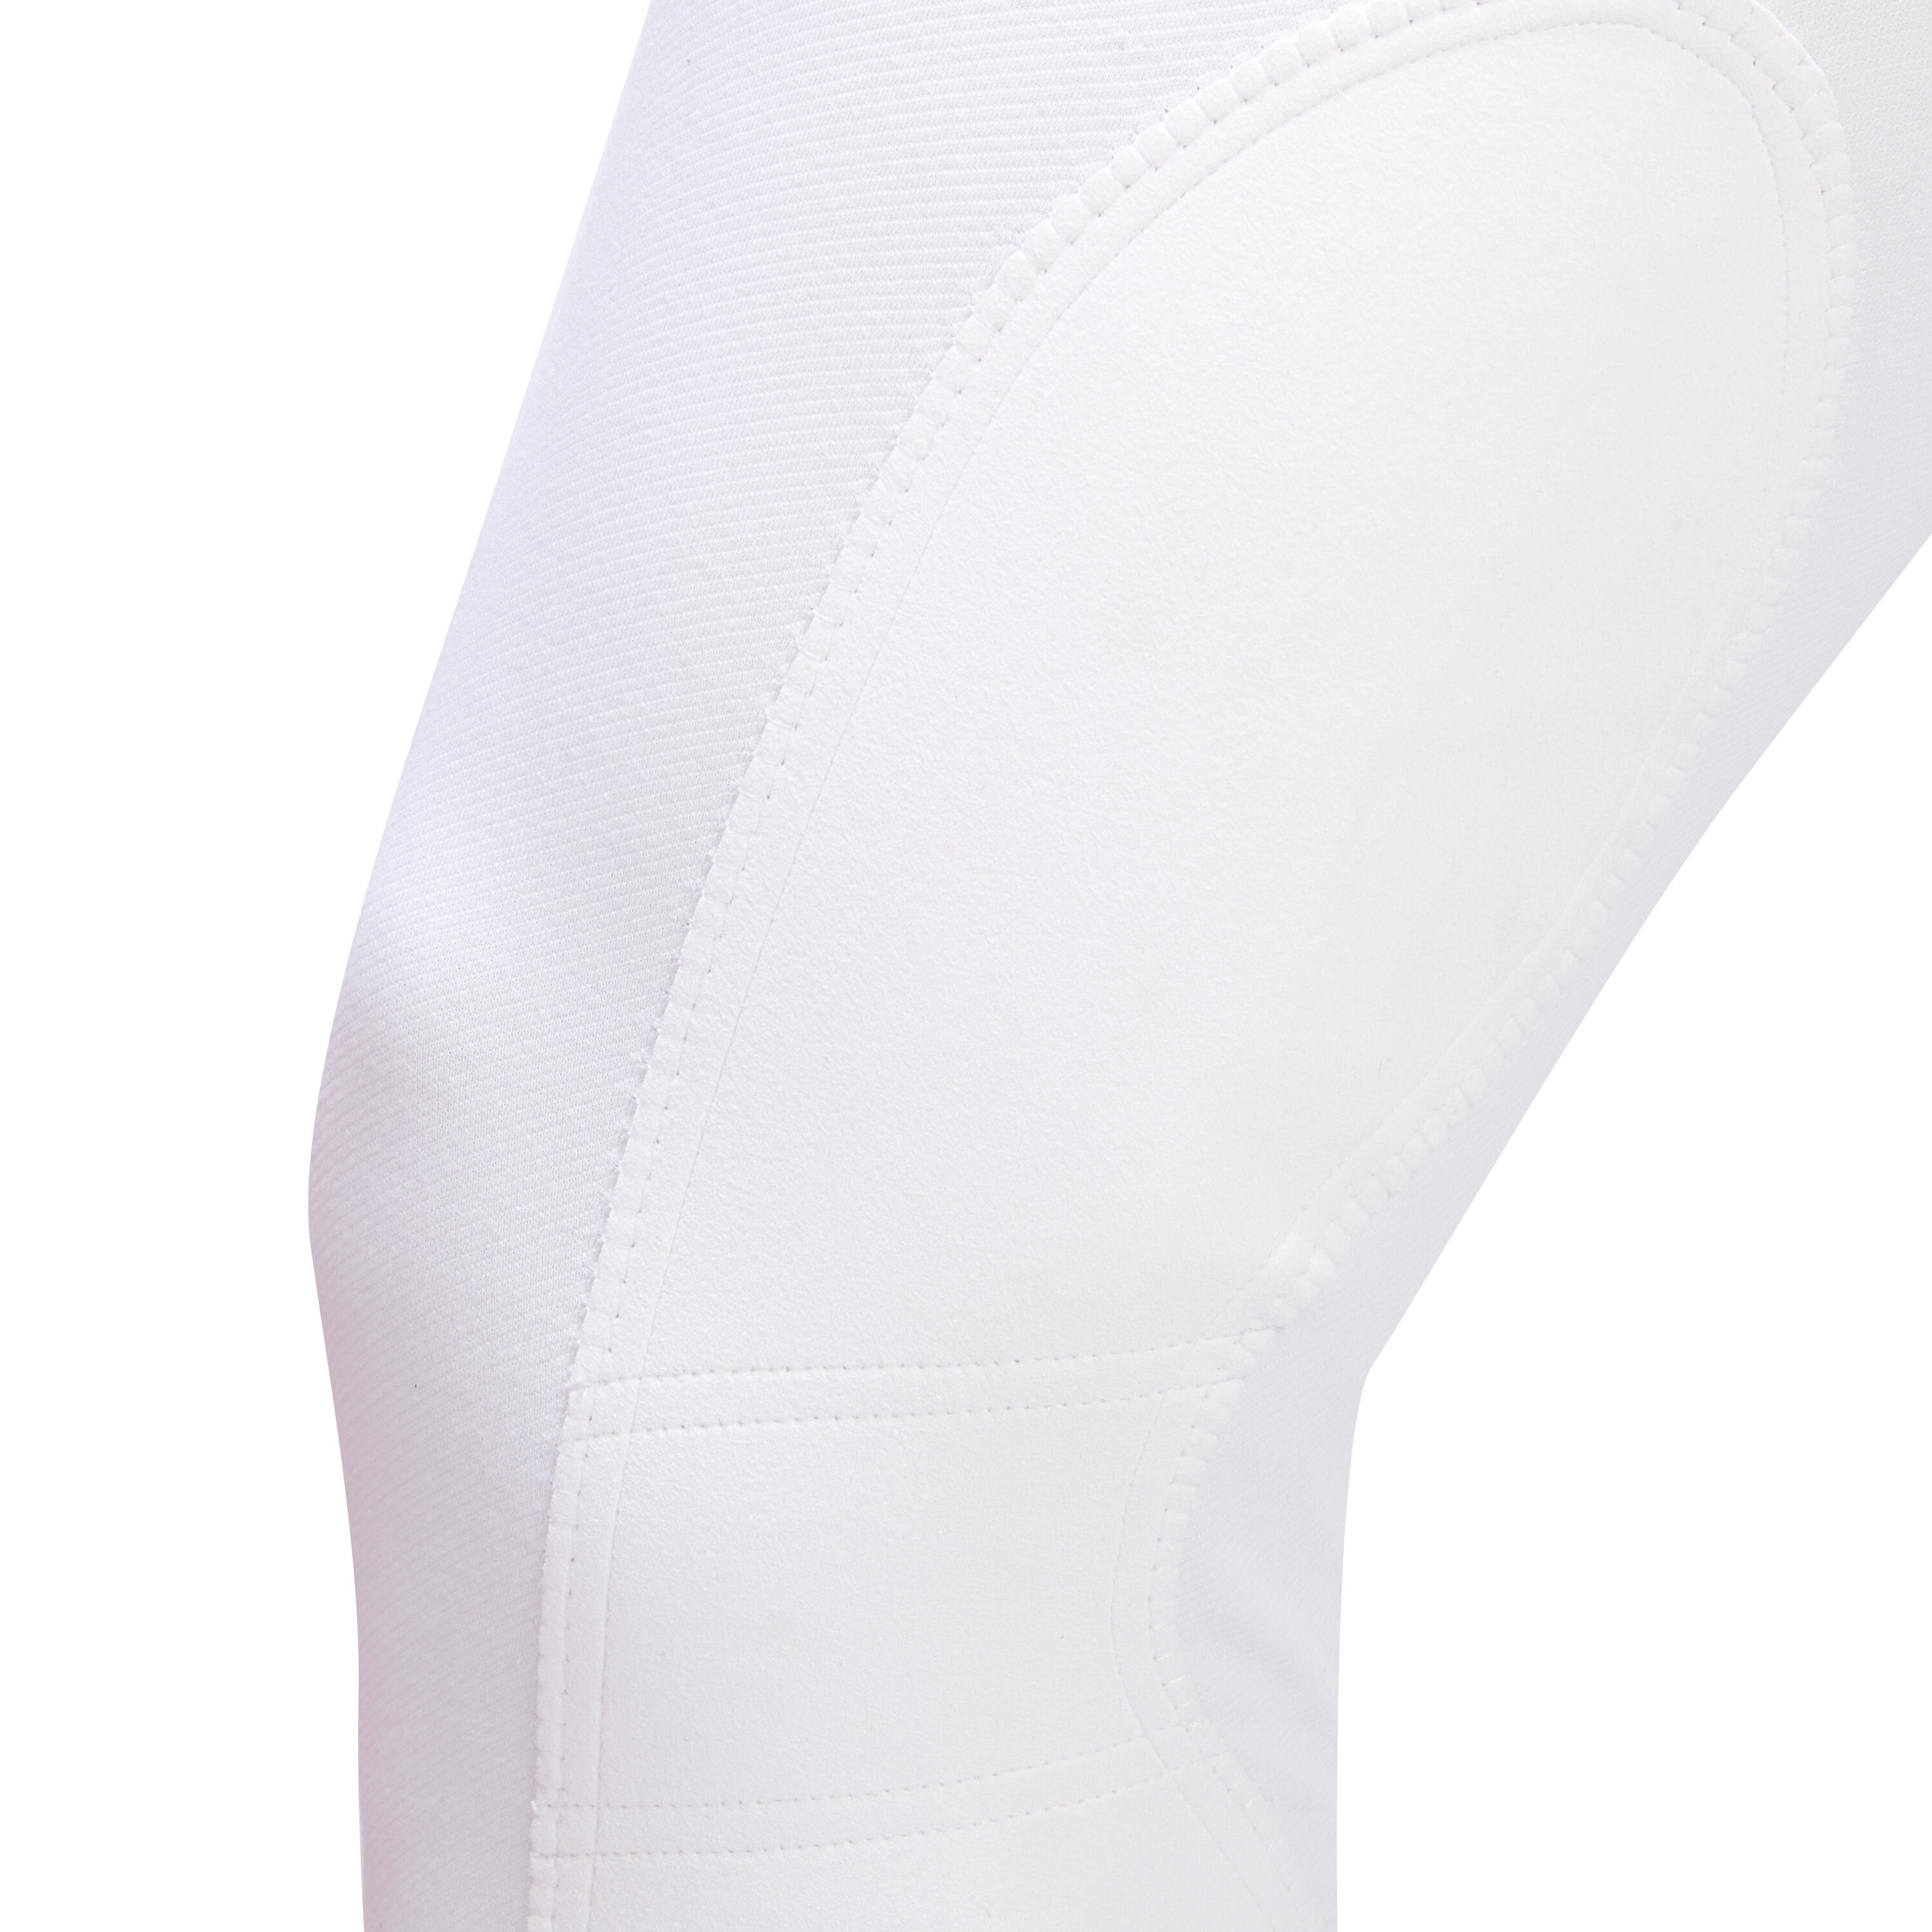 Men's Horse Riding Competition Jodhpurs with Grippy Suede Patches 140 - White 4/5